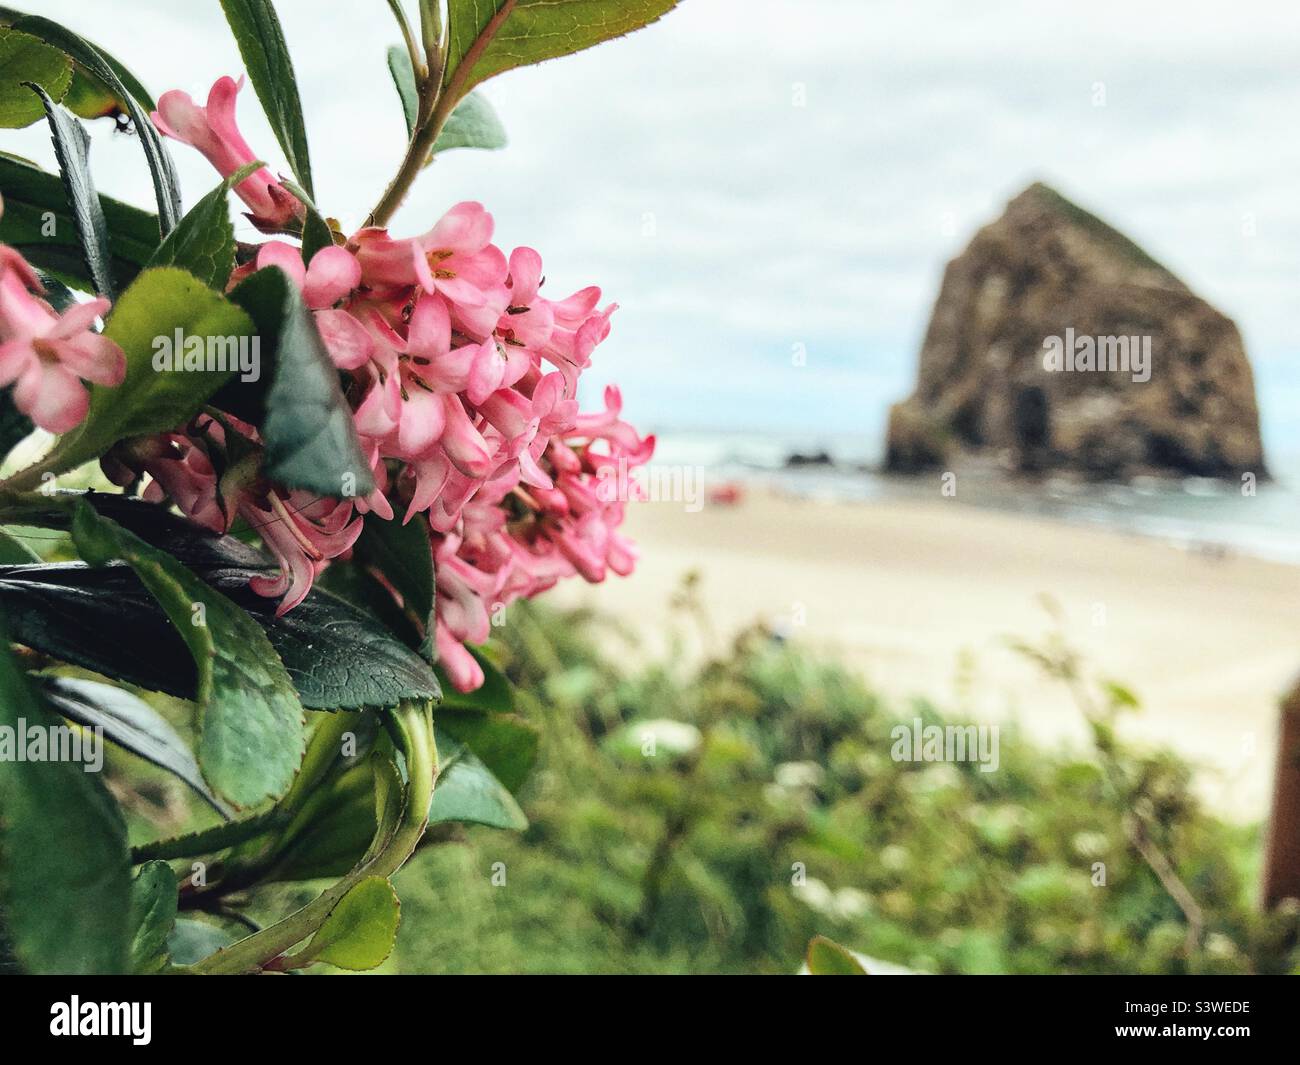 Pink Koreanspice viburnum with Haystack Rock in background Stock Photo